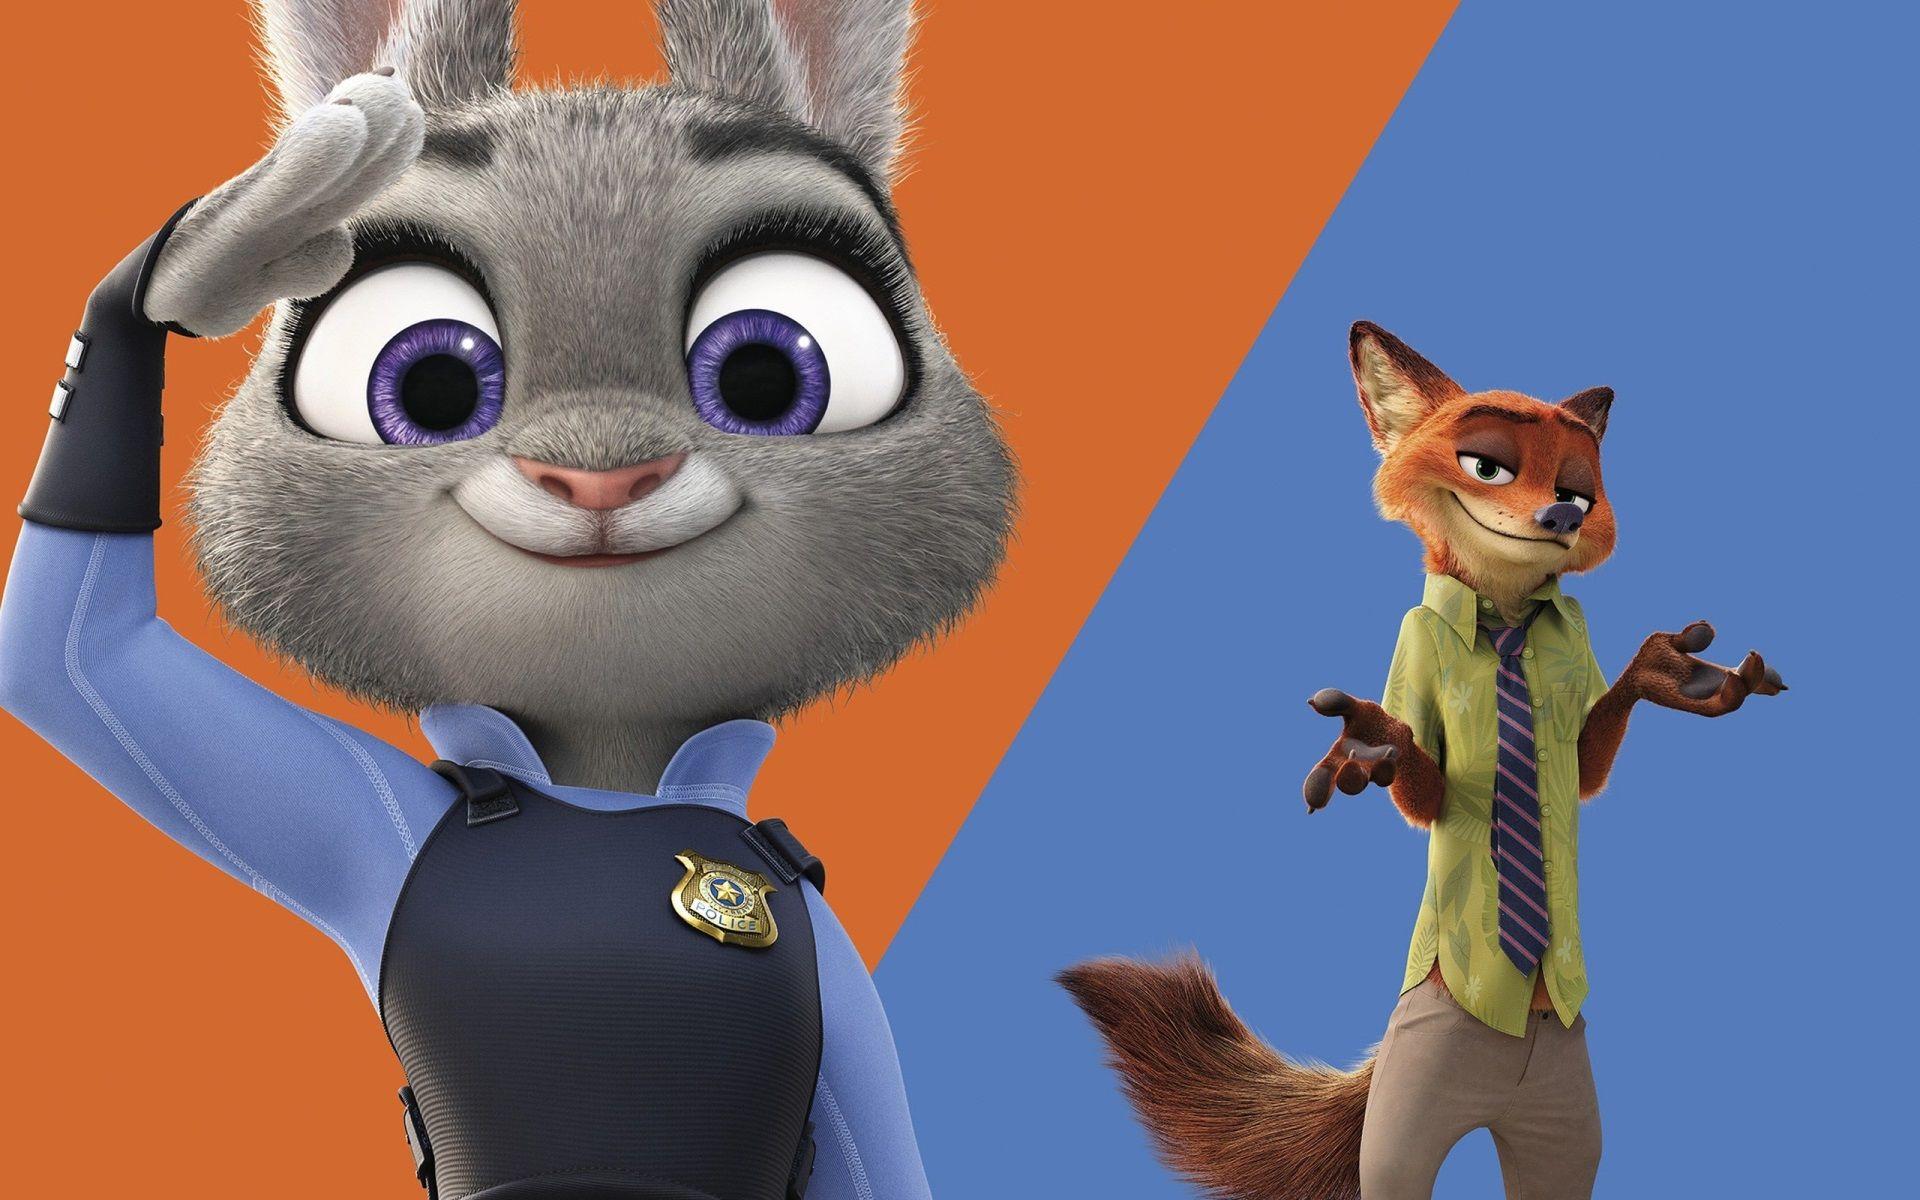 Zootopia download latest wallpapers for pc